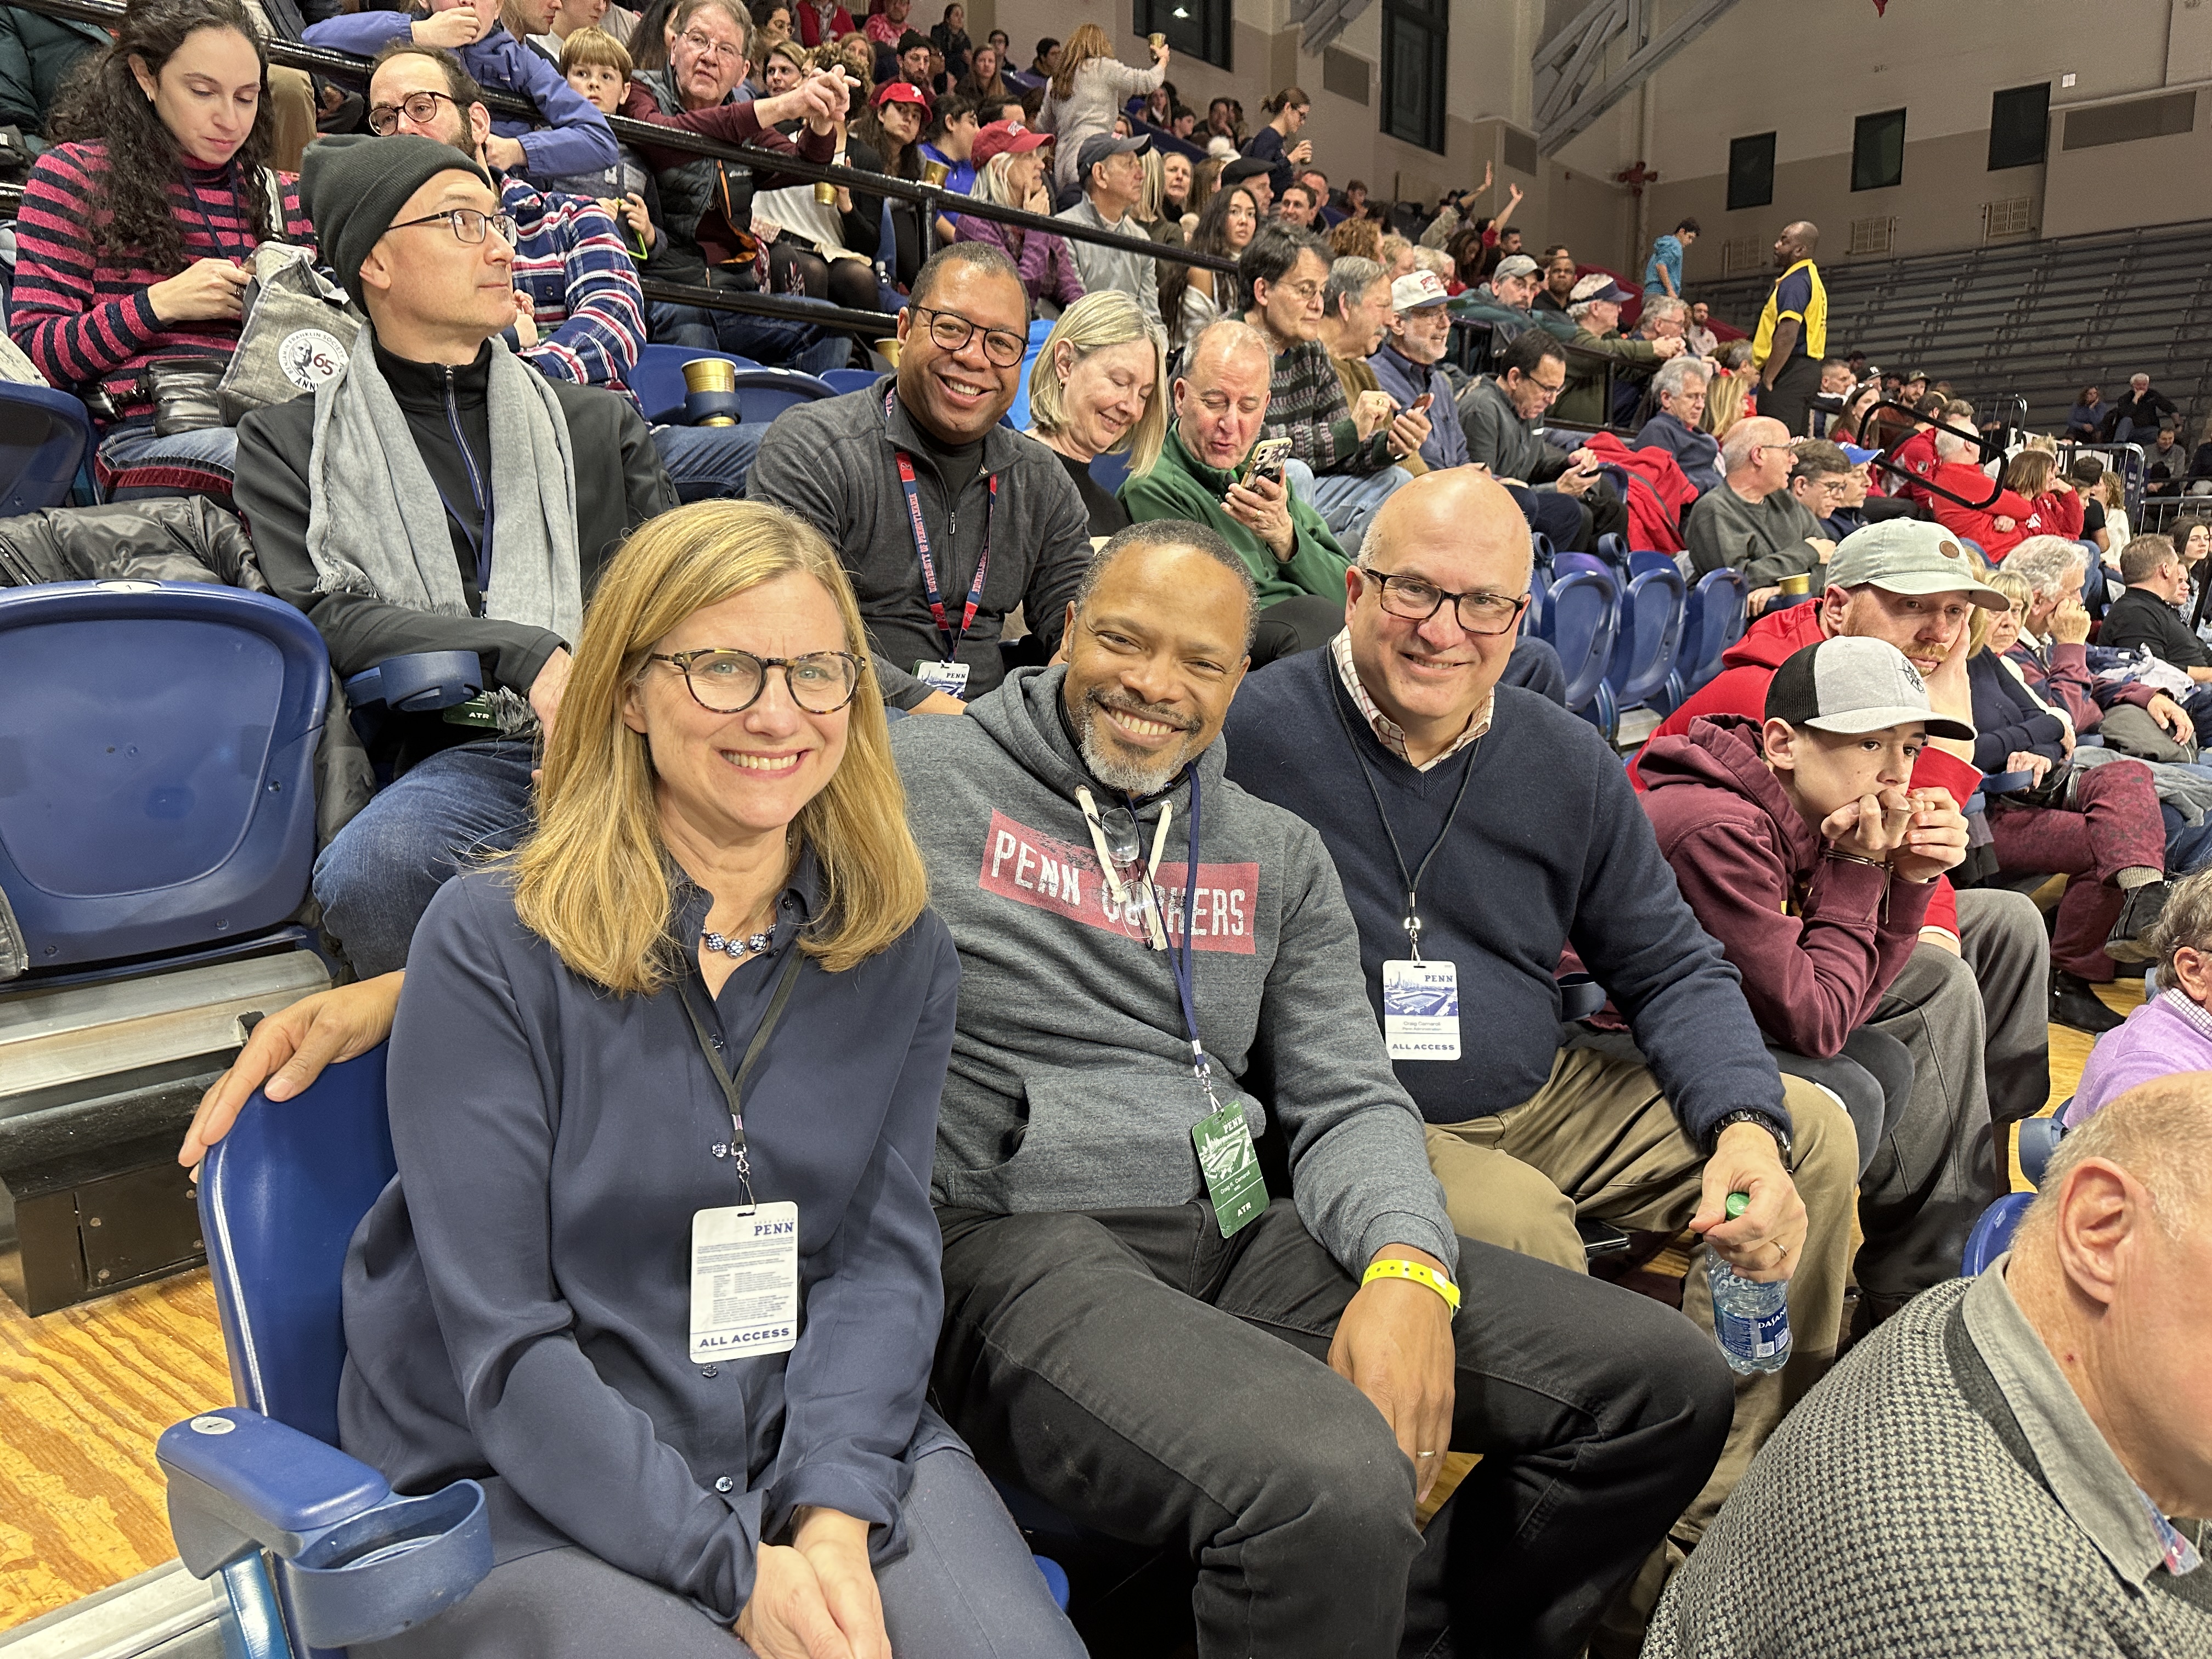 From left, President Liz Magill, alumnus and Penn parent John Nixon, and Senior Executive Vice President Craig Carnaroli take in the men’s basketball game at the Palestra. Chris Bradie, a Wharton alumnus and associate vice president for the Business Services Division, is behind Nixon. 